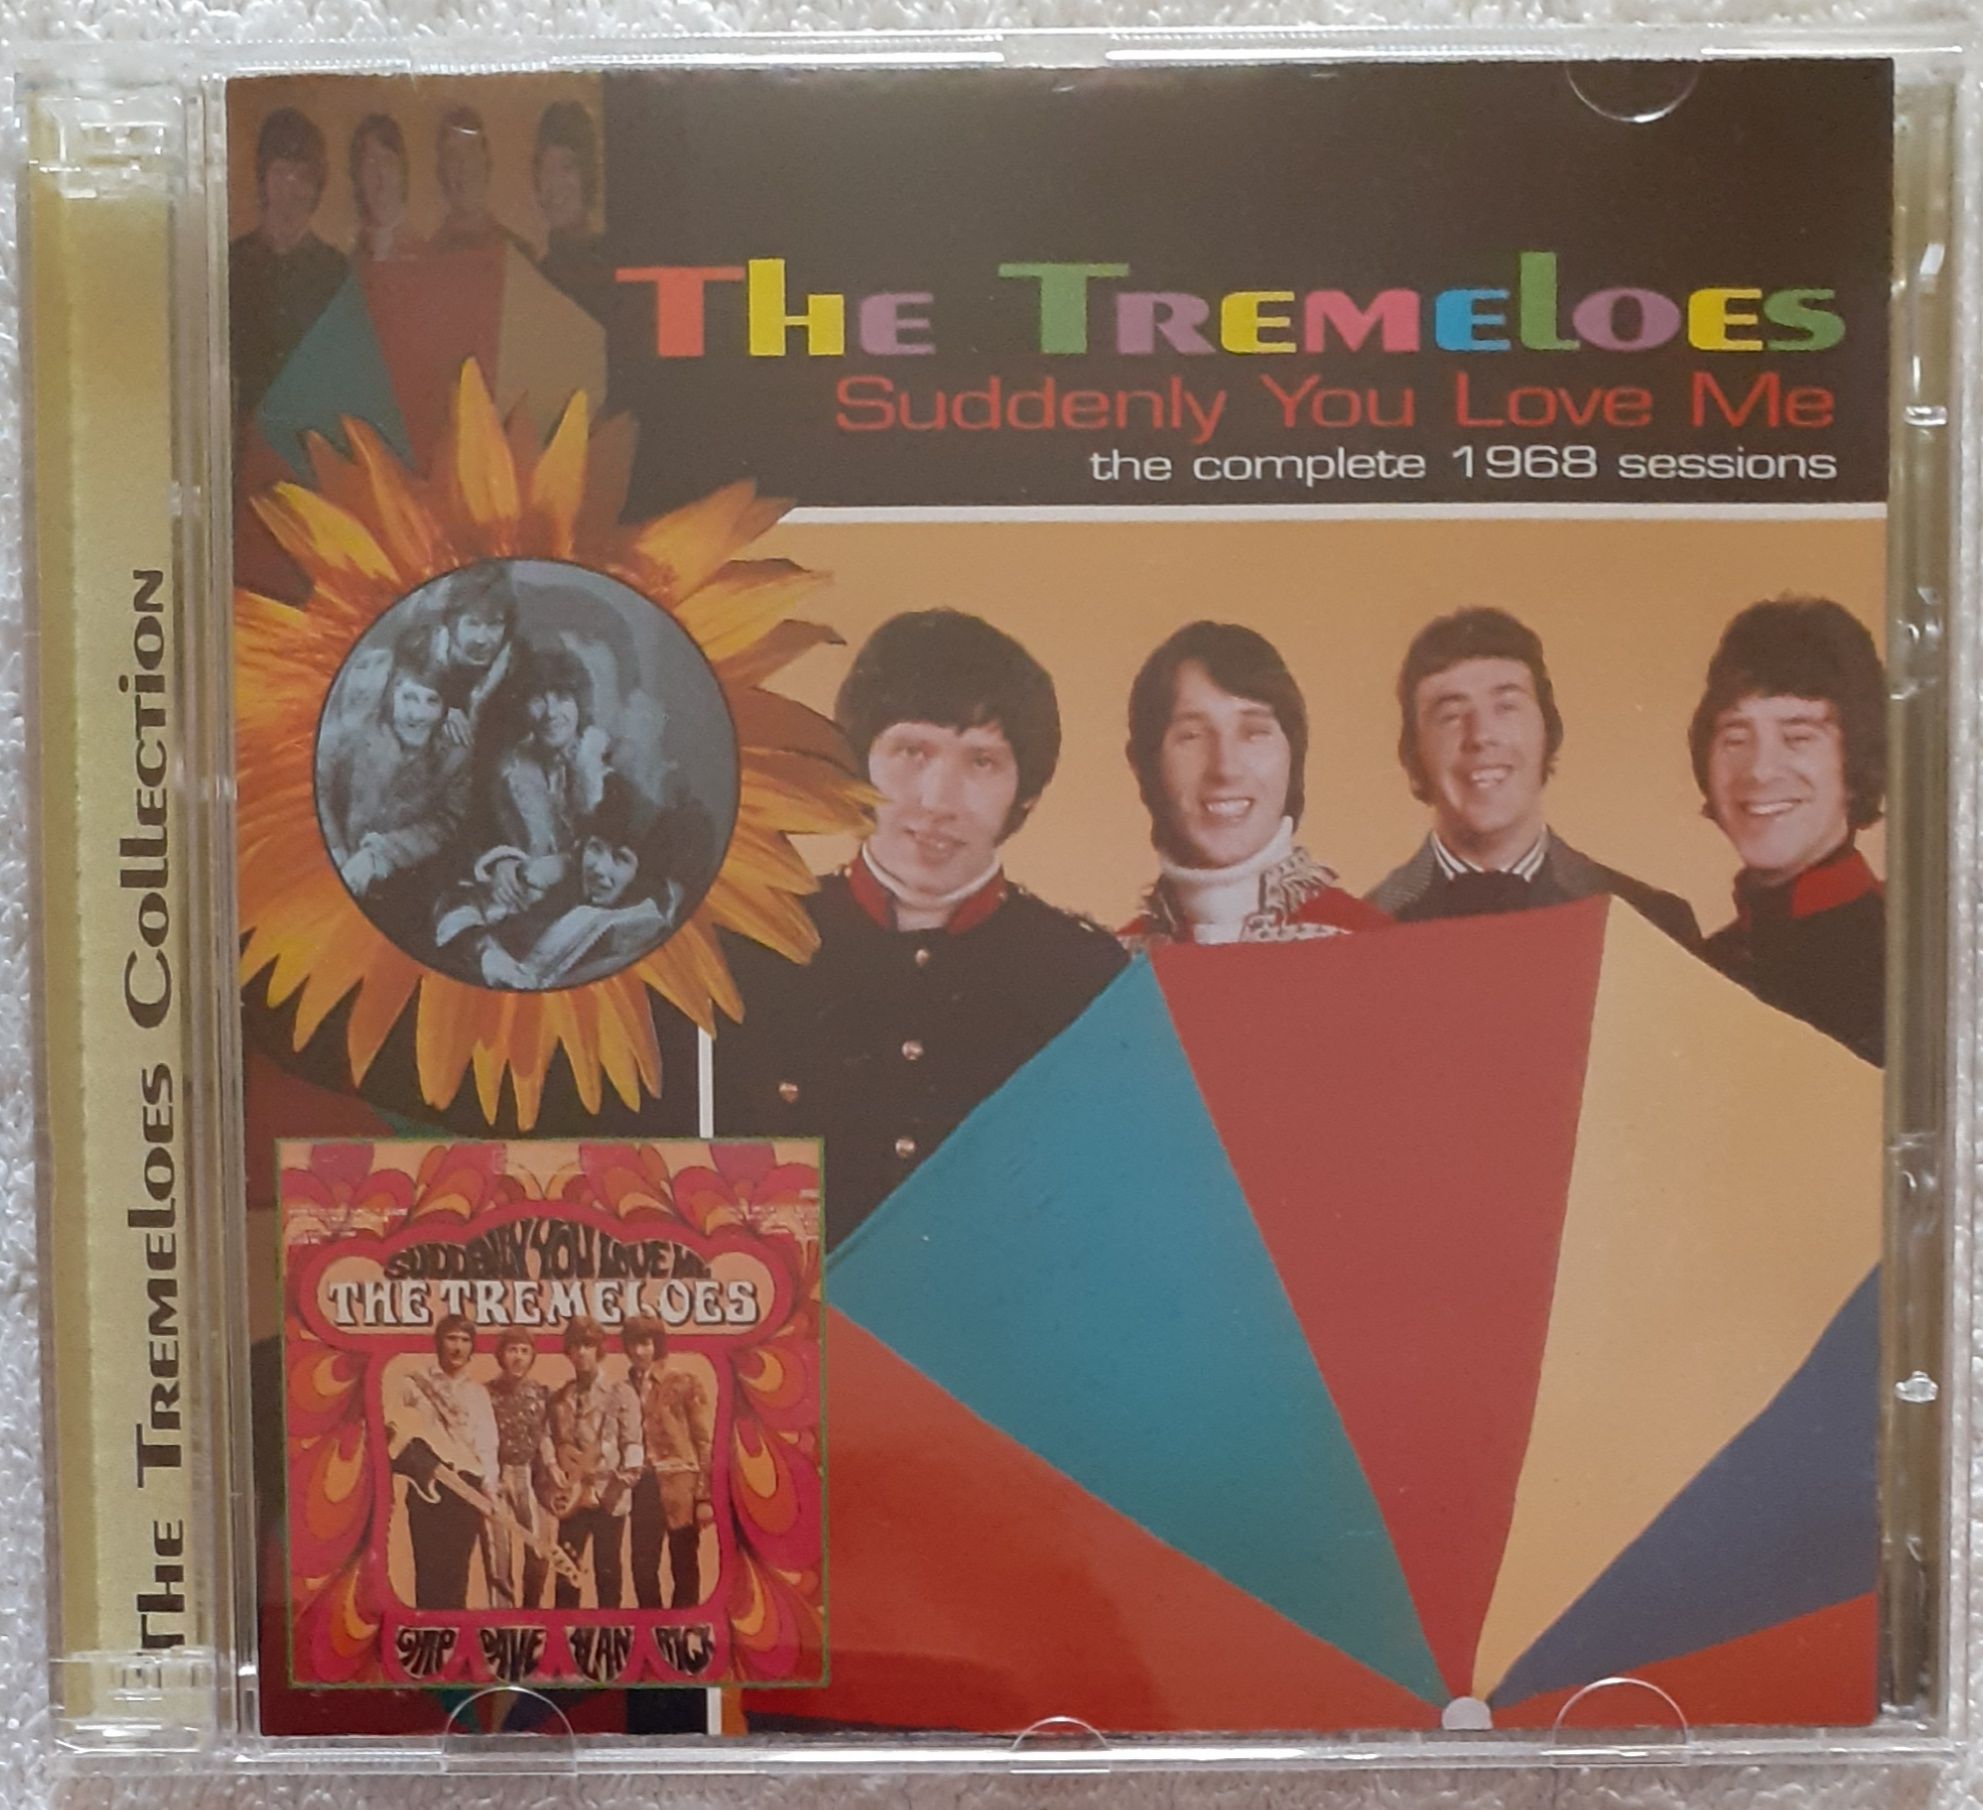 The Tremeloes ‎– Suddenly You Love Me:The Complete 1968 Sessions (2CD)